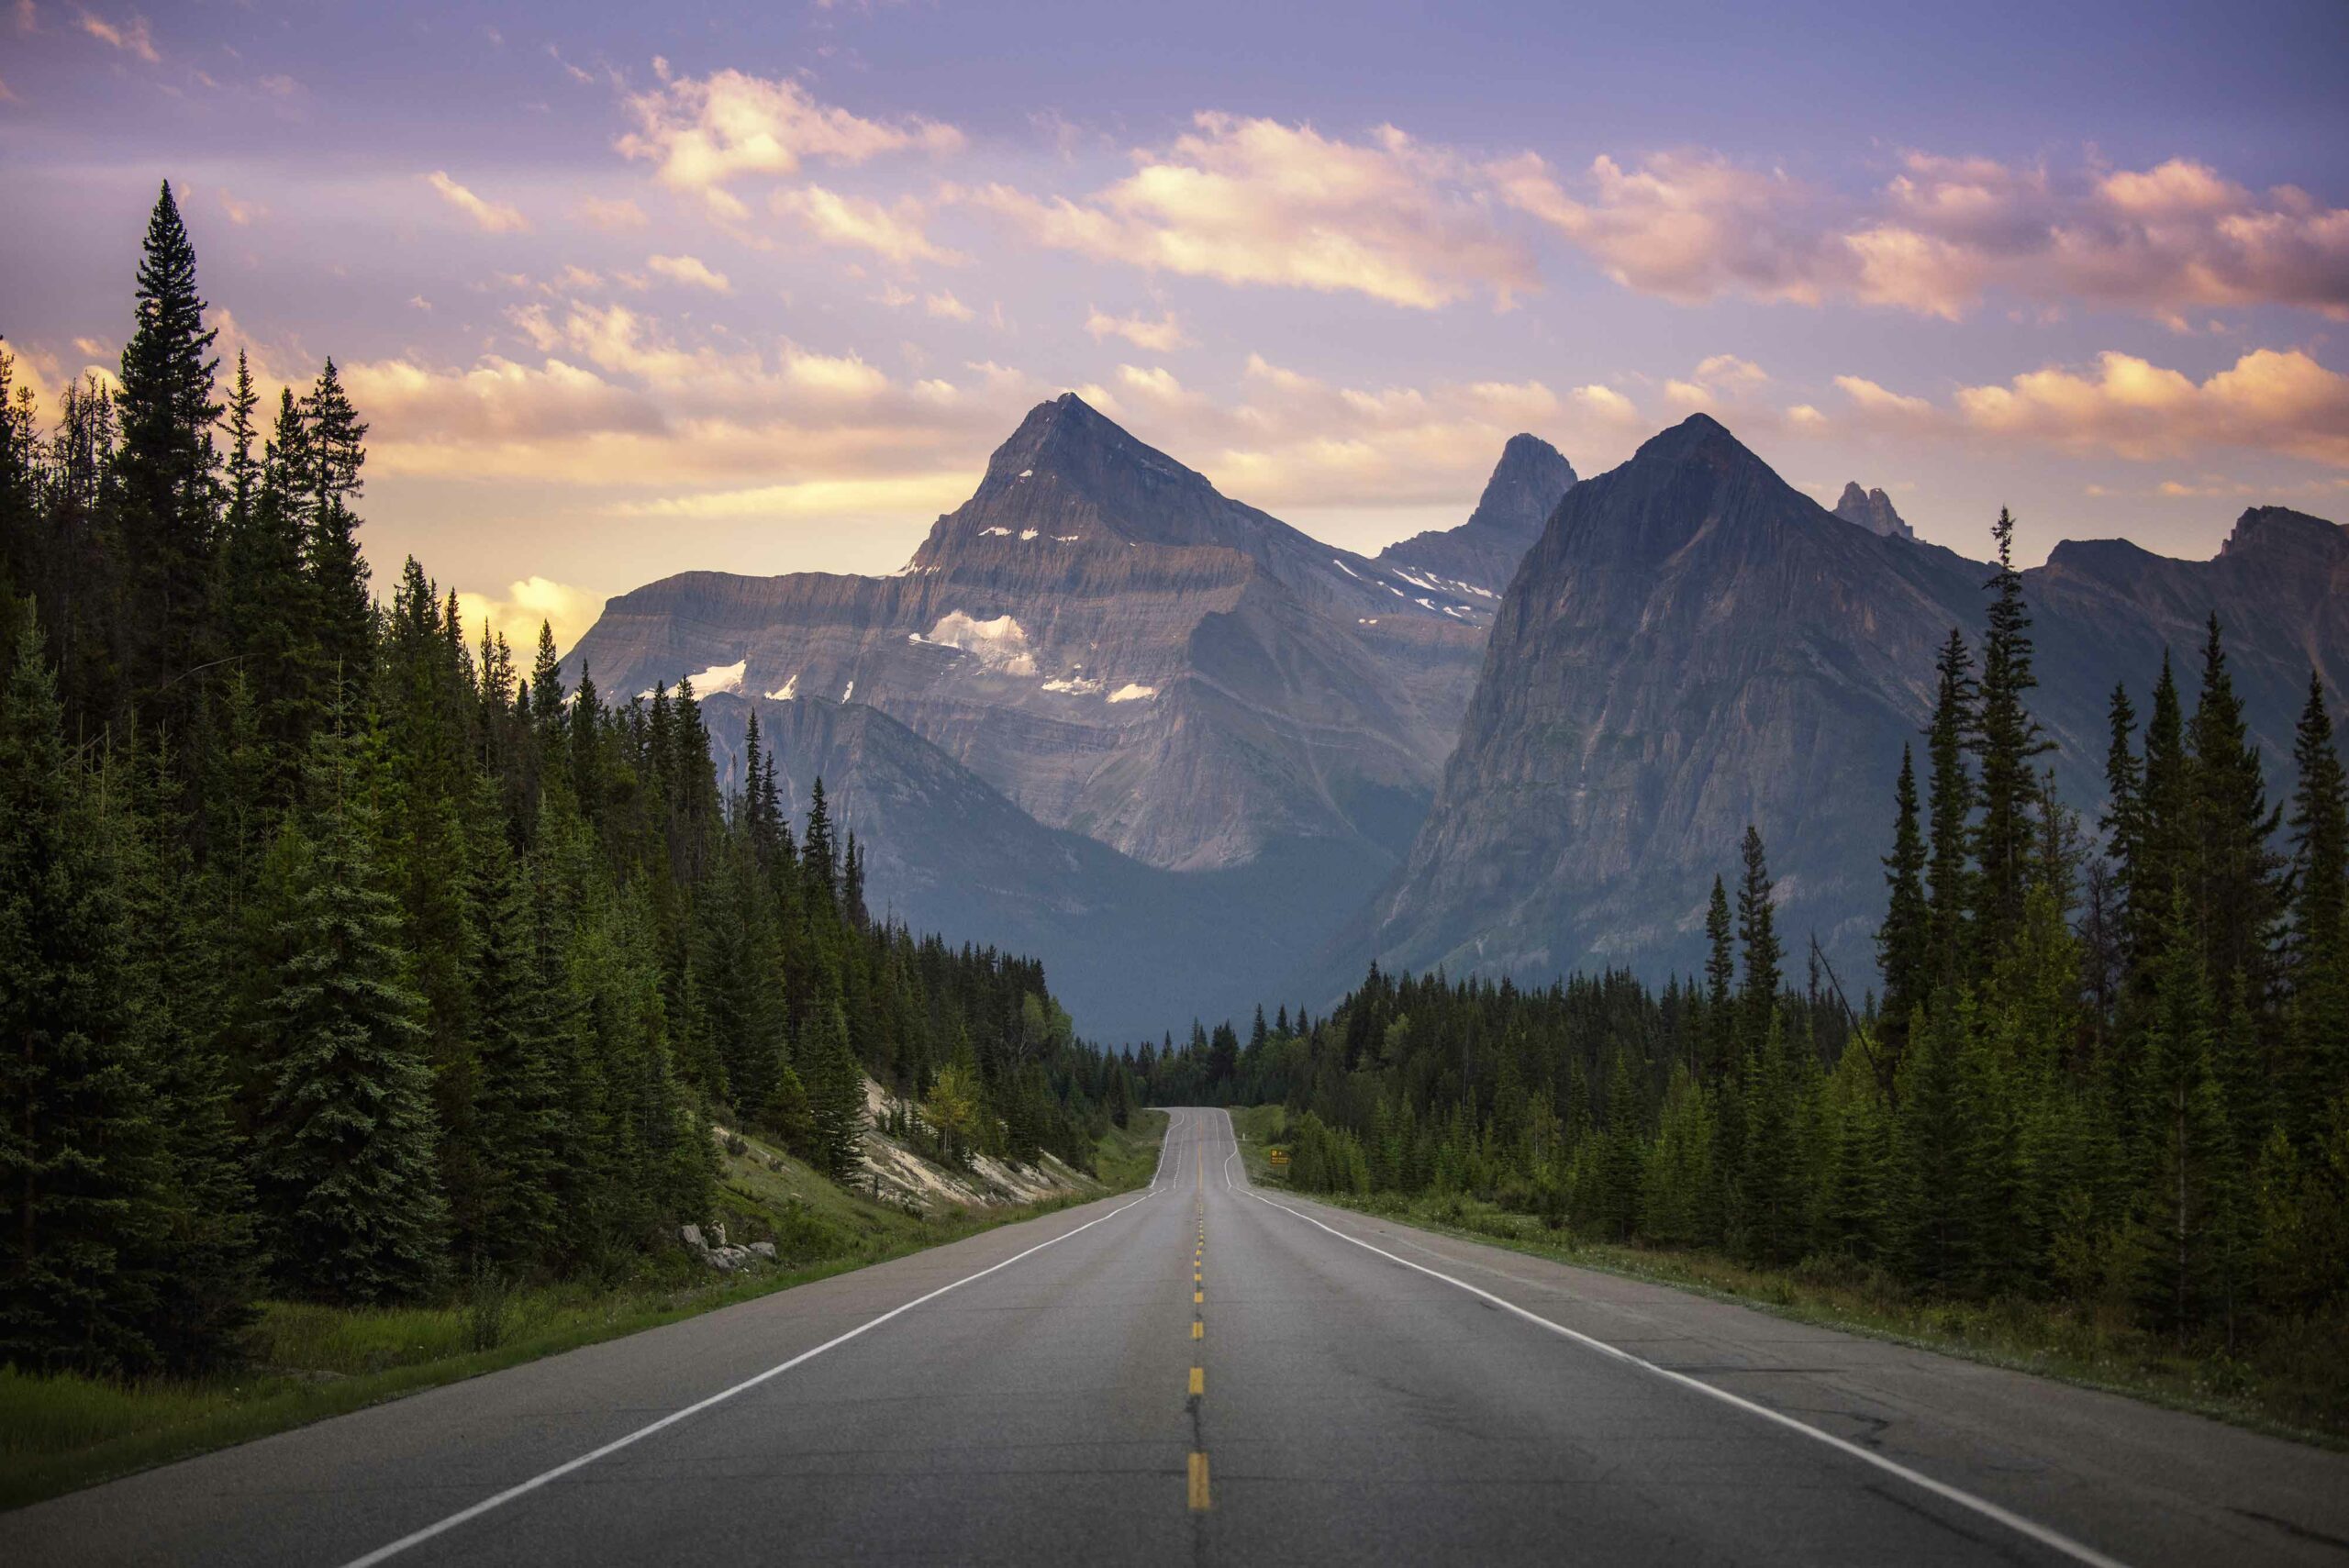 An iconic moment along the Icefields Parkway. There are many ways to access the Canadian Rockies along this route